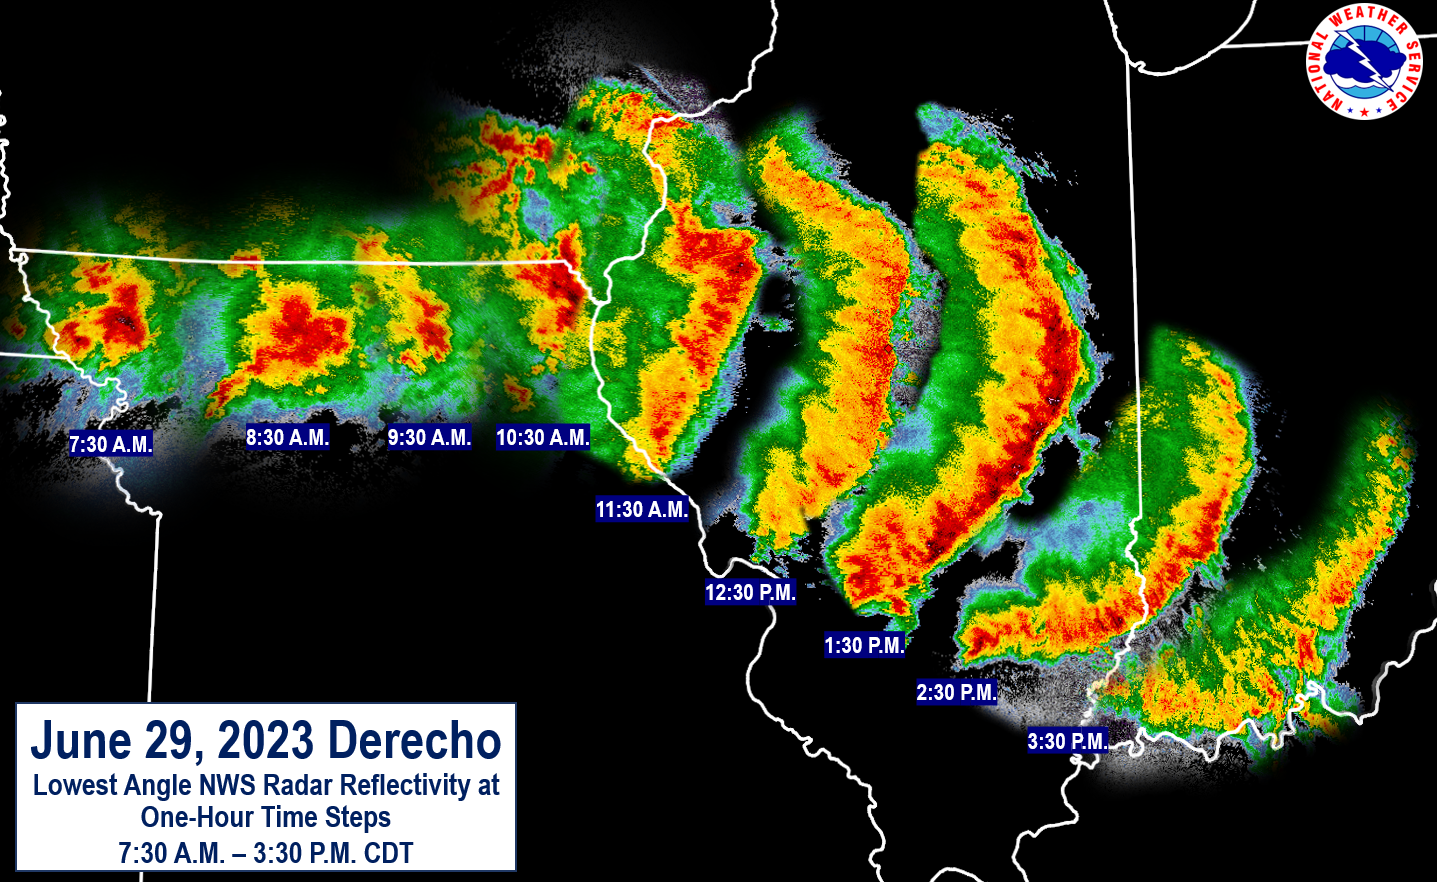 June 29, 2023 Derecho, Significant Hail, Tornadoes